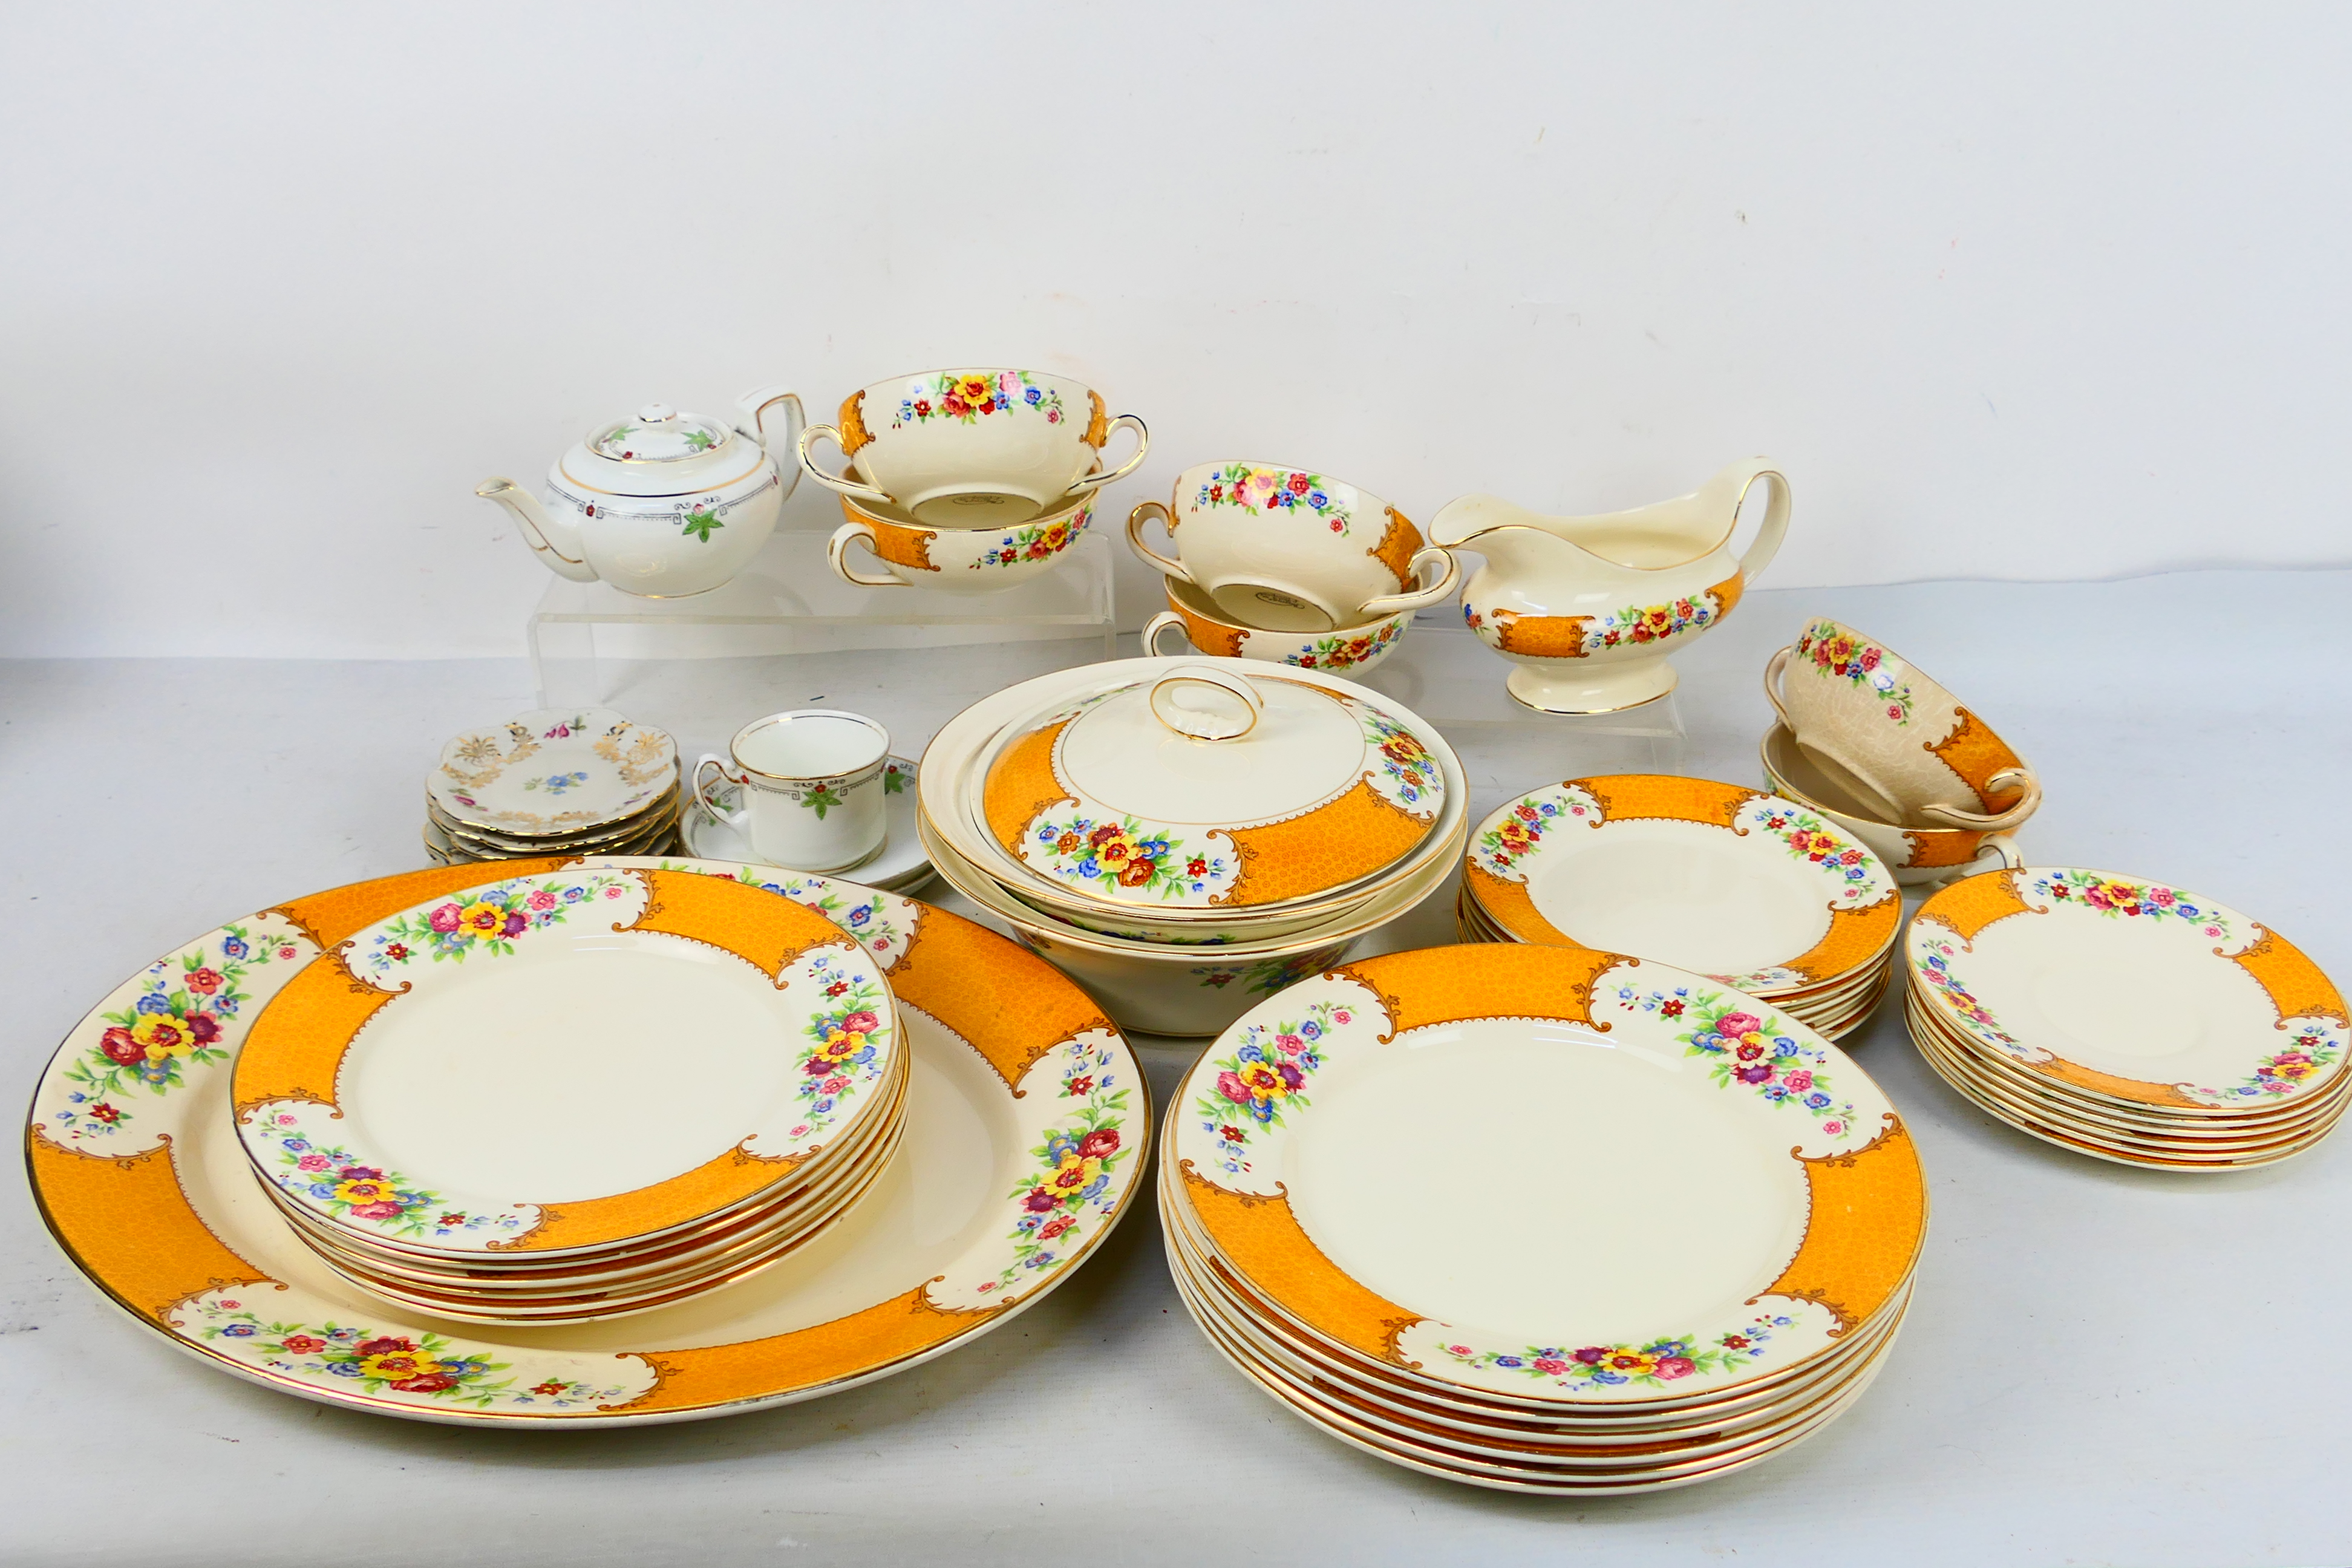 A quantity of Allertons dinner wares with floral decoration, retailed by Warings, - Image 7 of 9